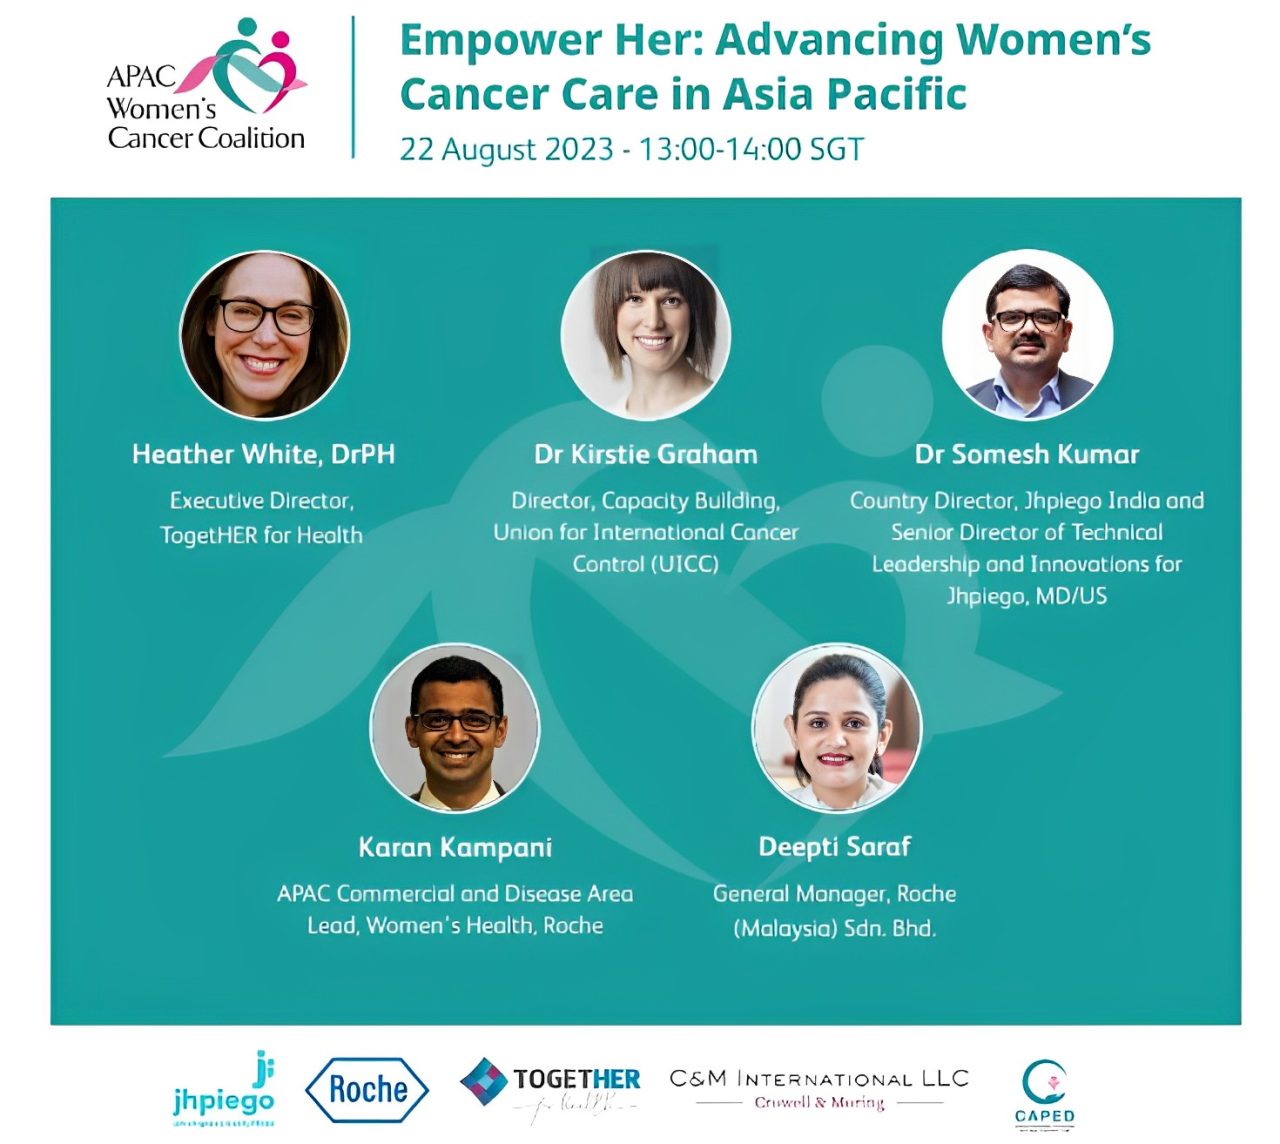 Kirstie Graham joins other global panelists for APAC Women’s Cancer Coalition’s event – Union for International Cancer Control